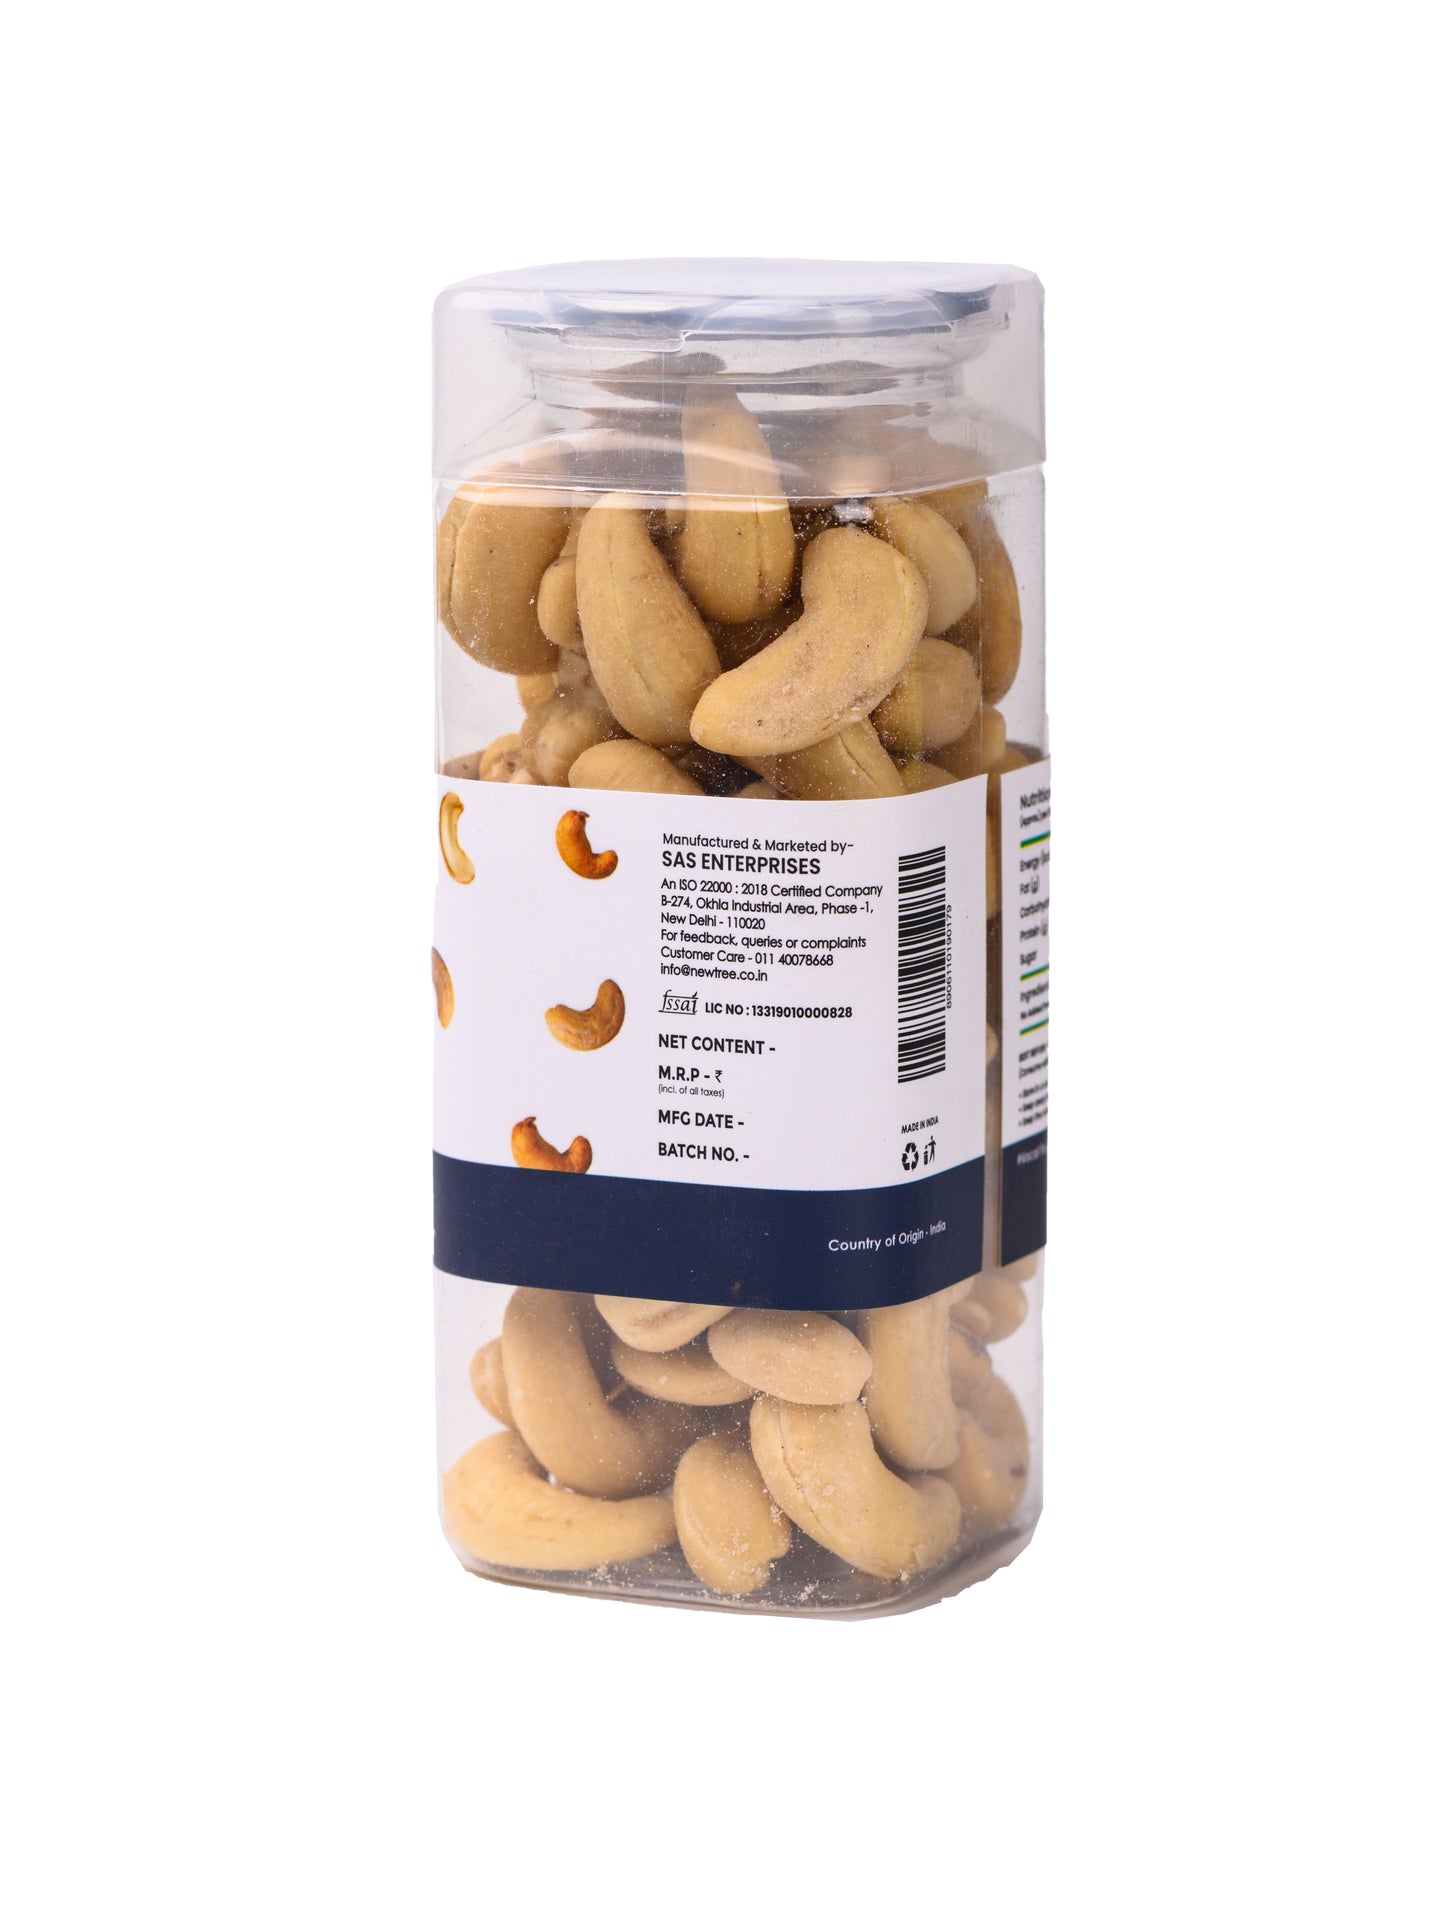 Flavoured Roasted Cashew